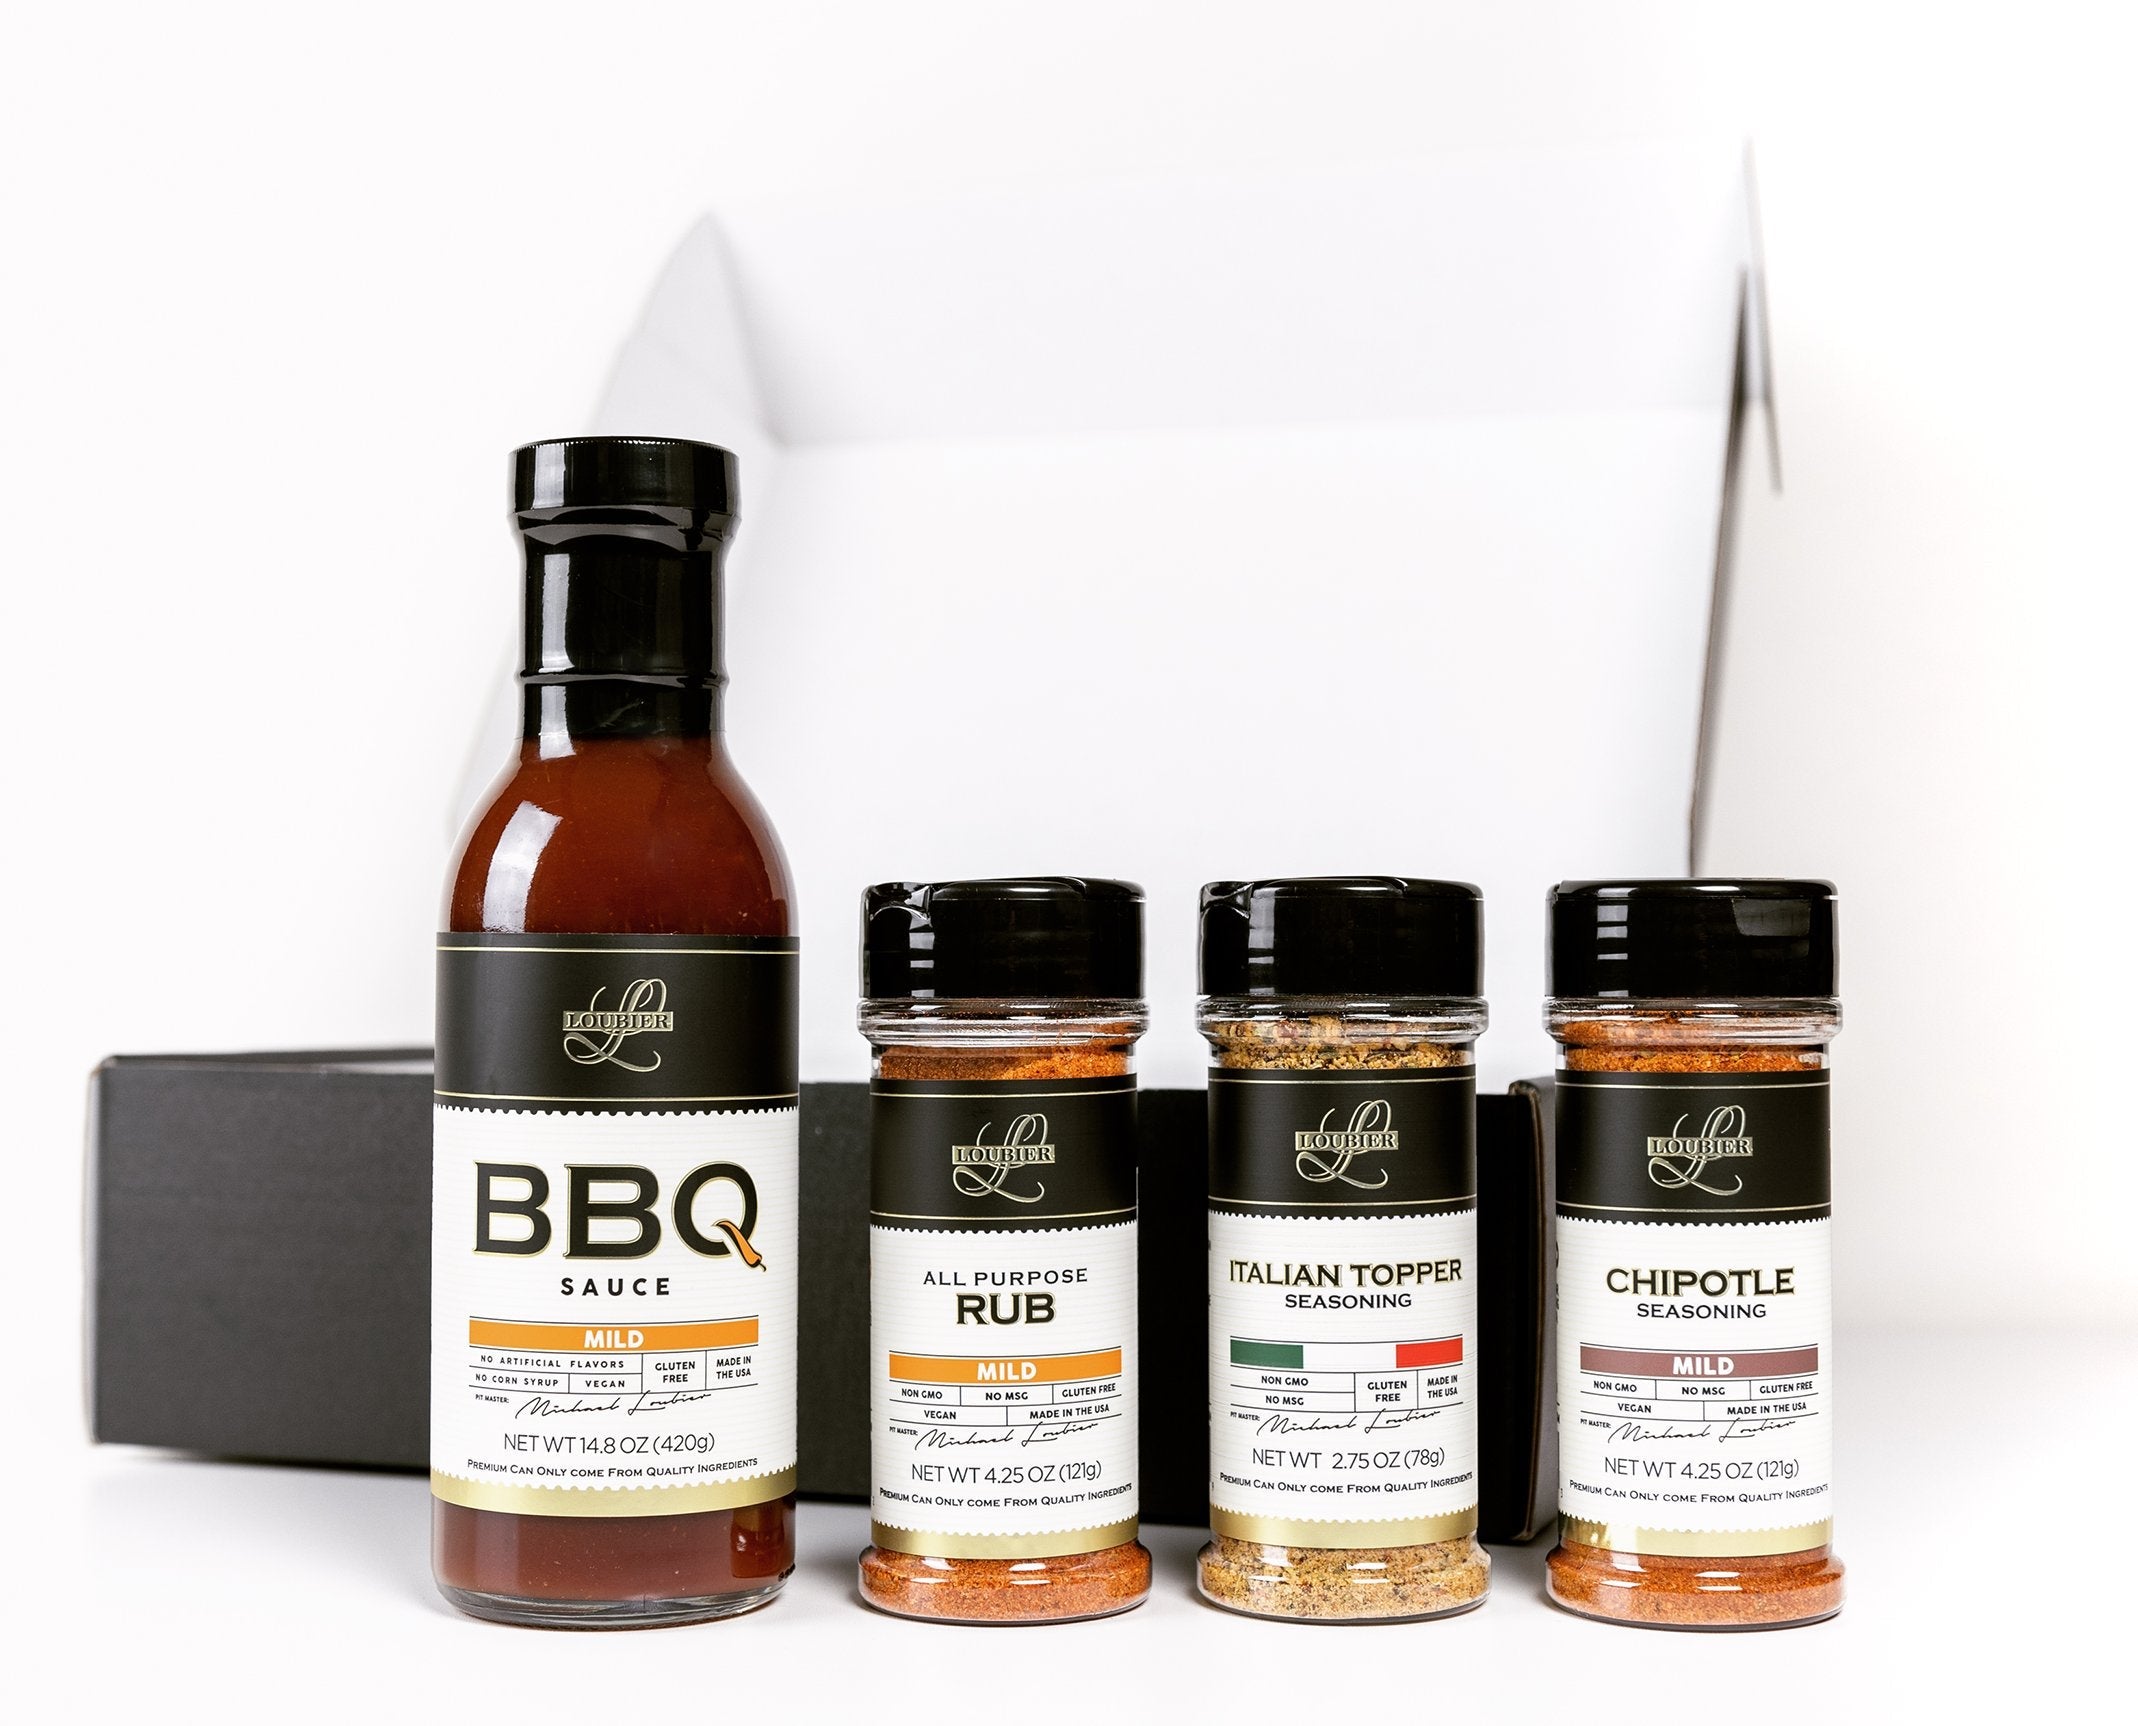 BBQ Barbecue Sauce and Rub Sampler Pack